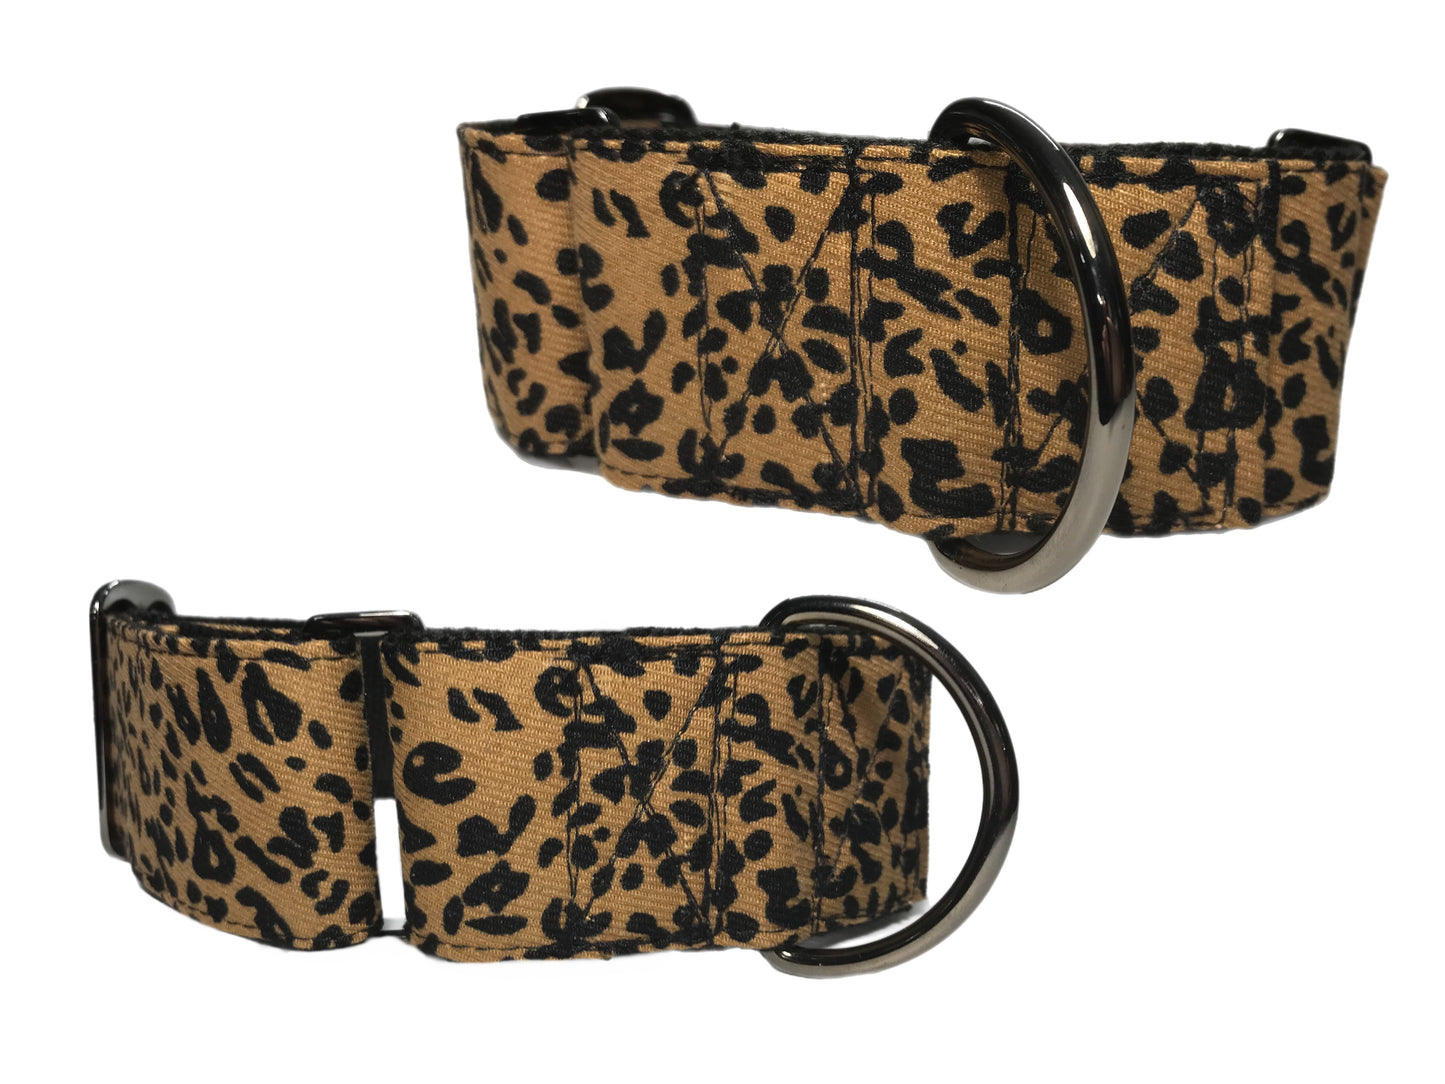 Large martingale collar for the bigger dogs! Leopard print